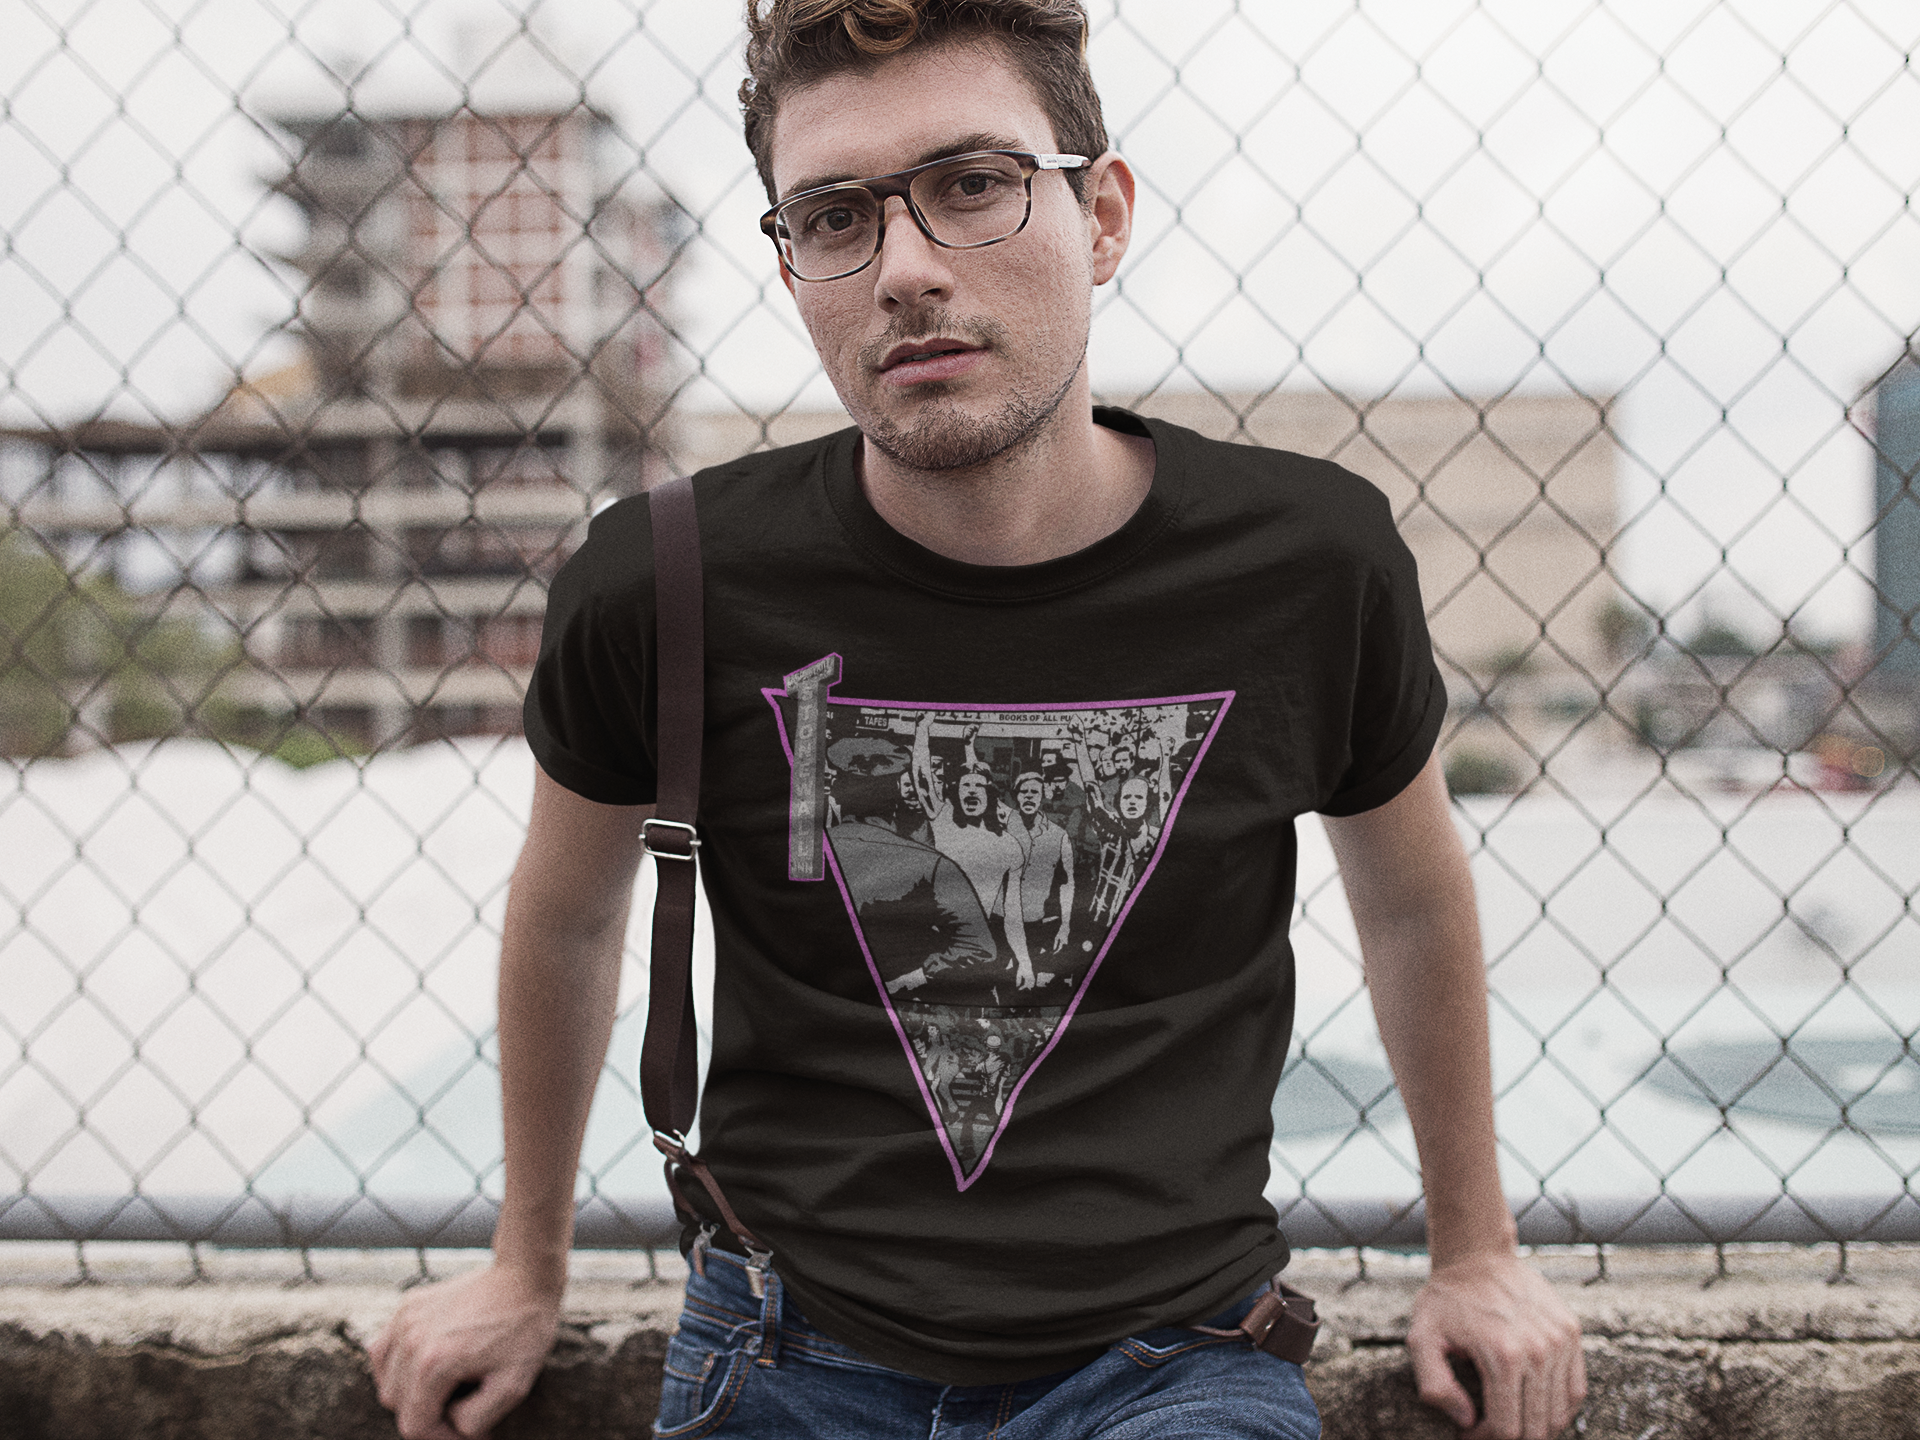 Hipster wearing a Gay T-Shirt commemorating the Stonewall riots